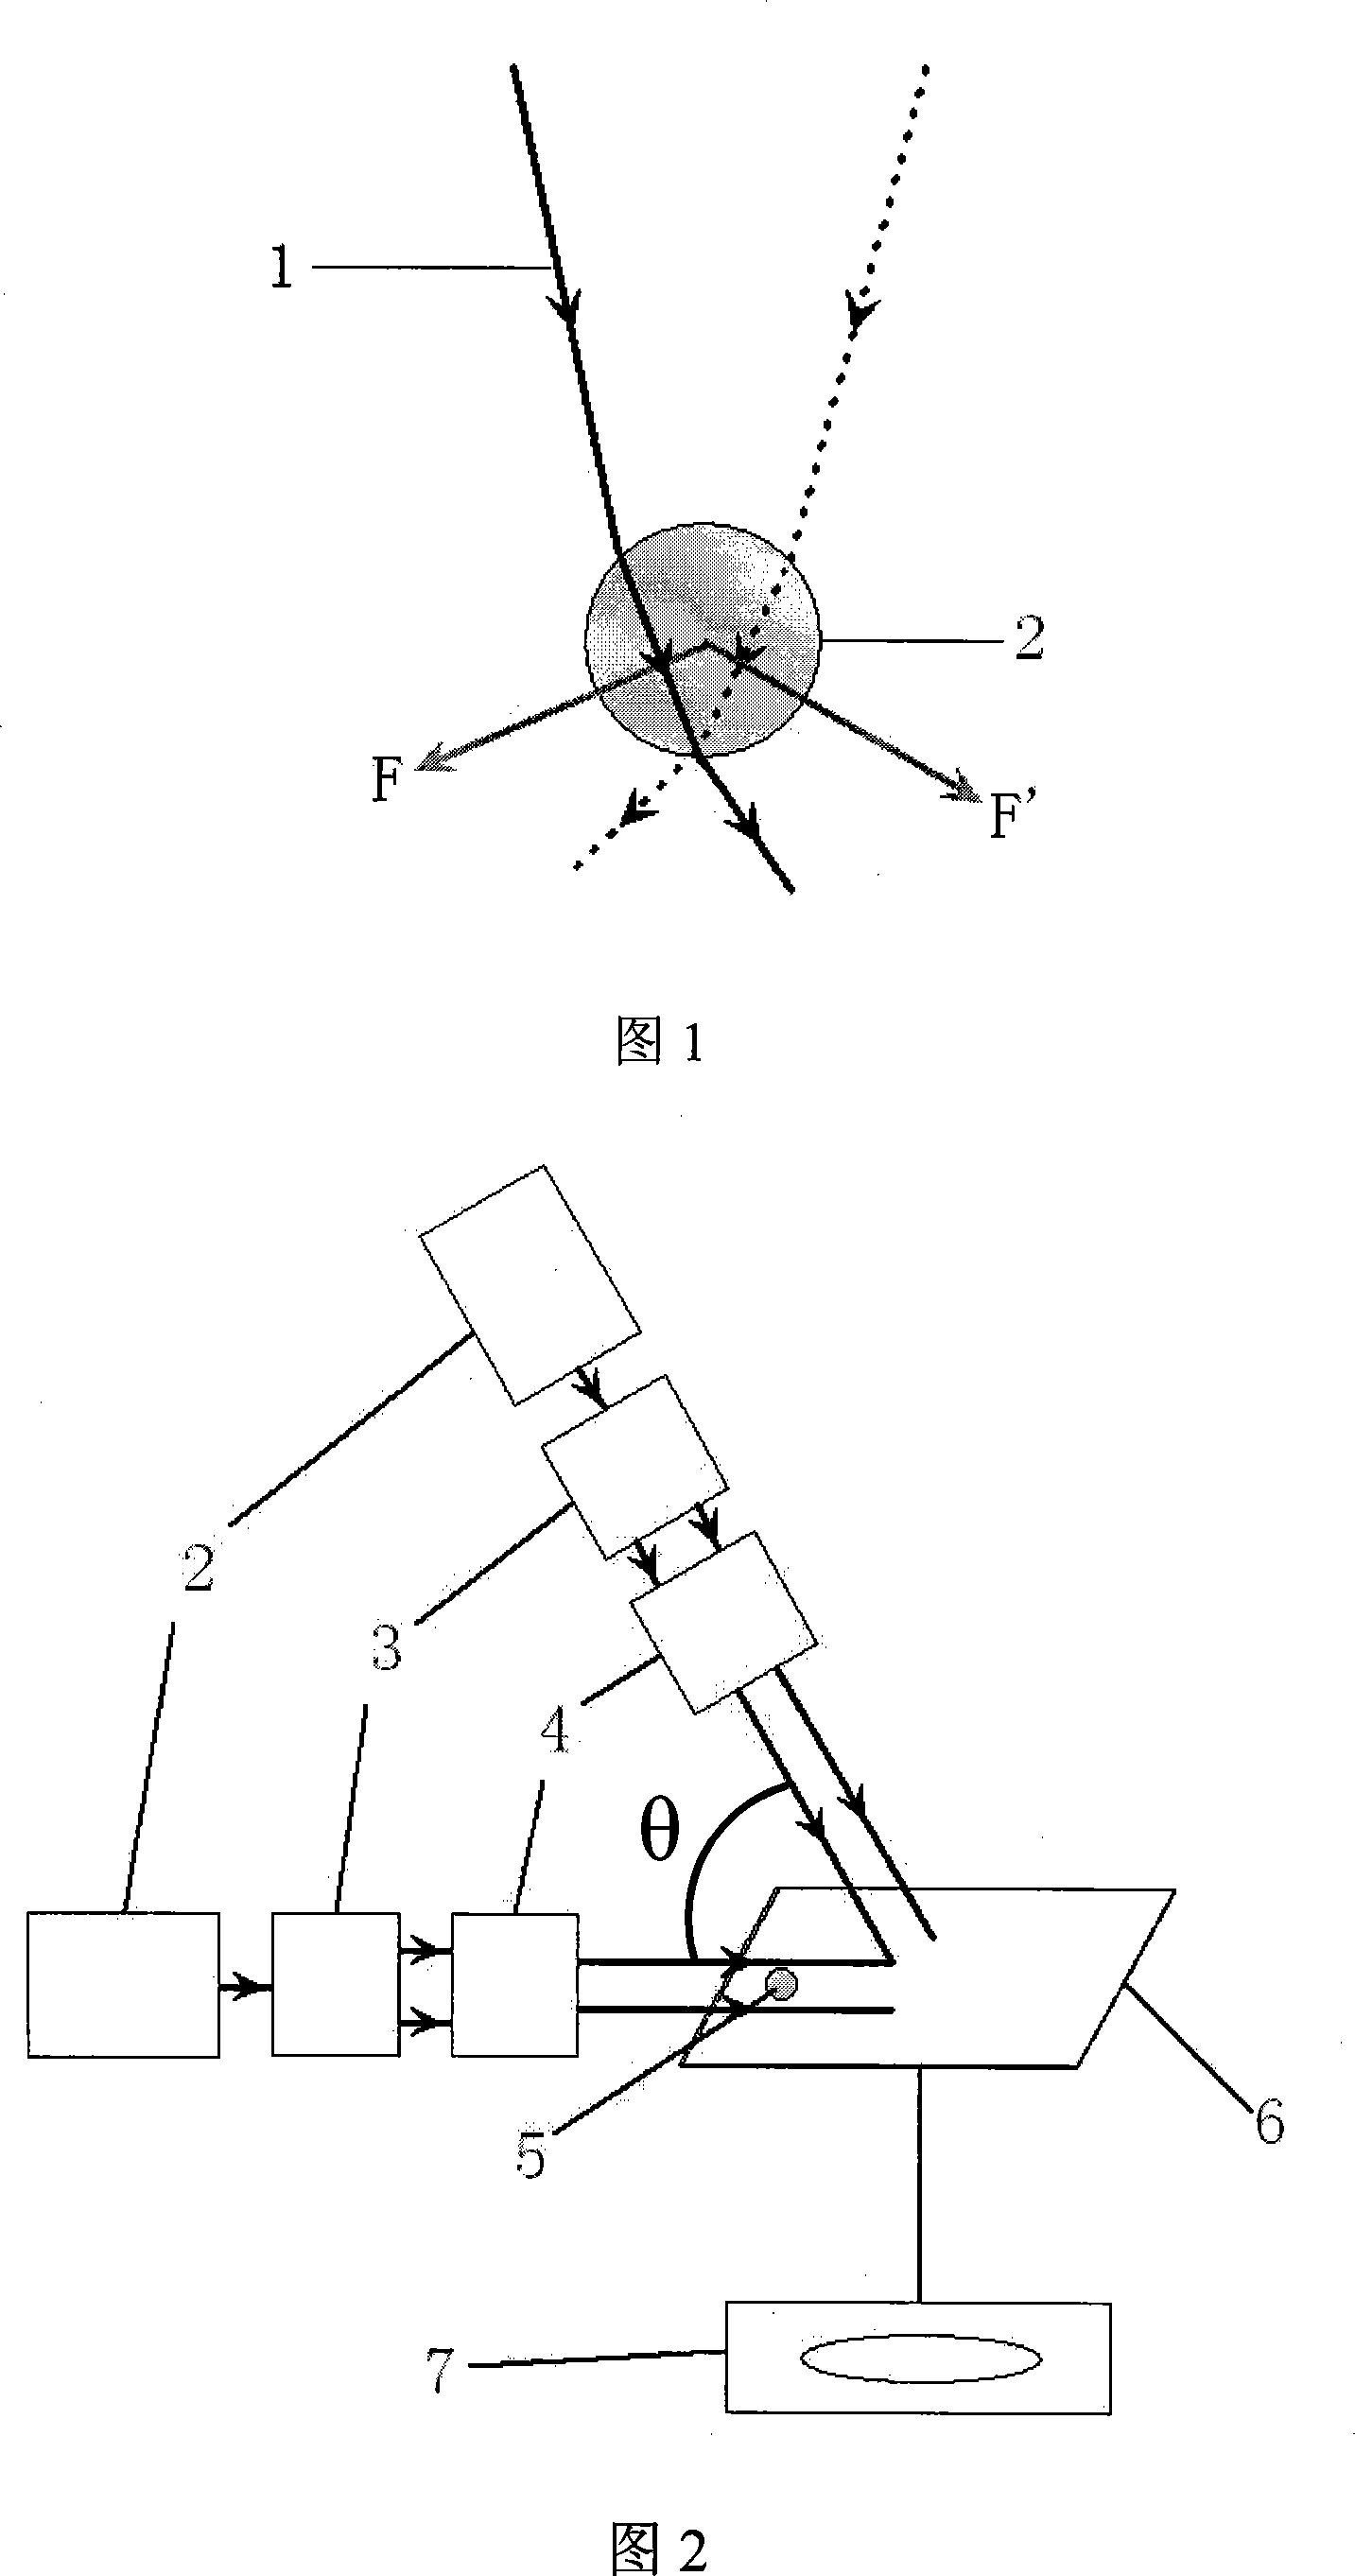 Laser micro control device and method for transportation and orientation of movable corpuscle and cell